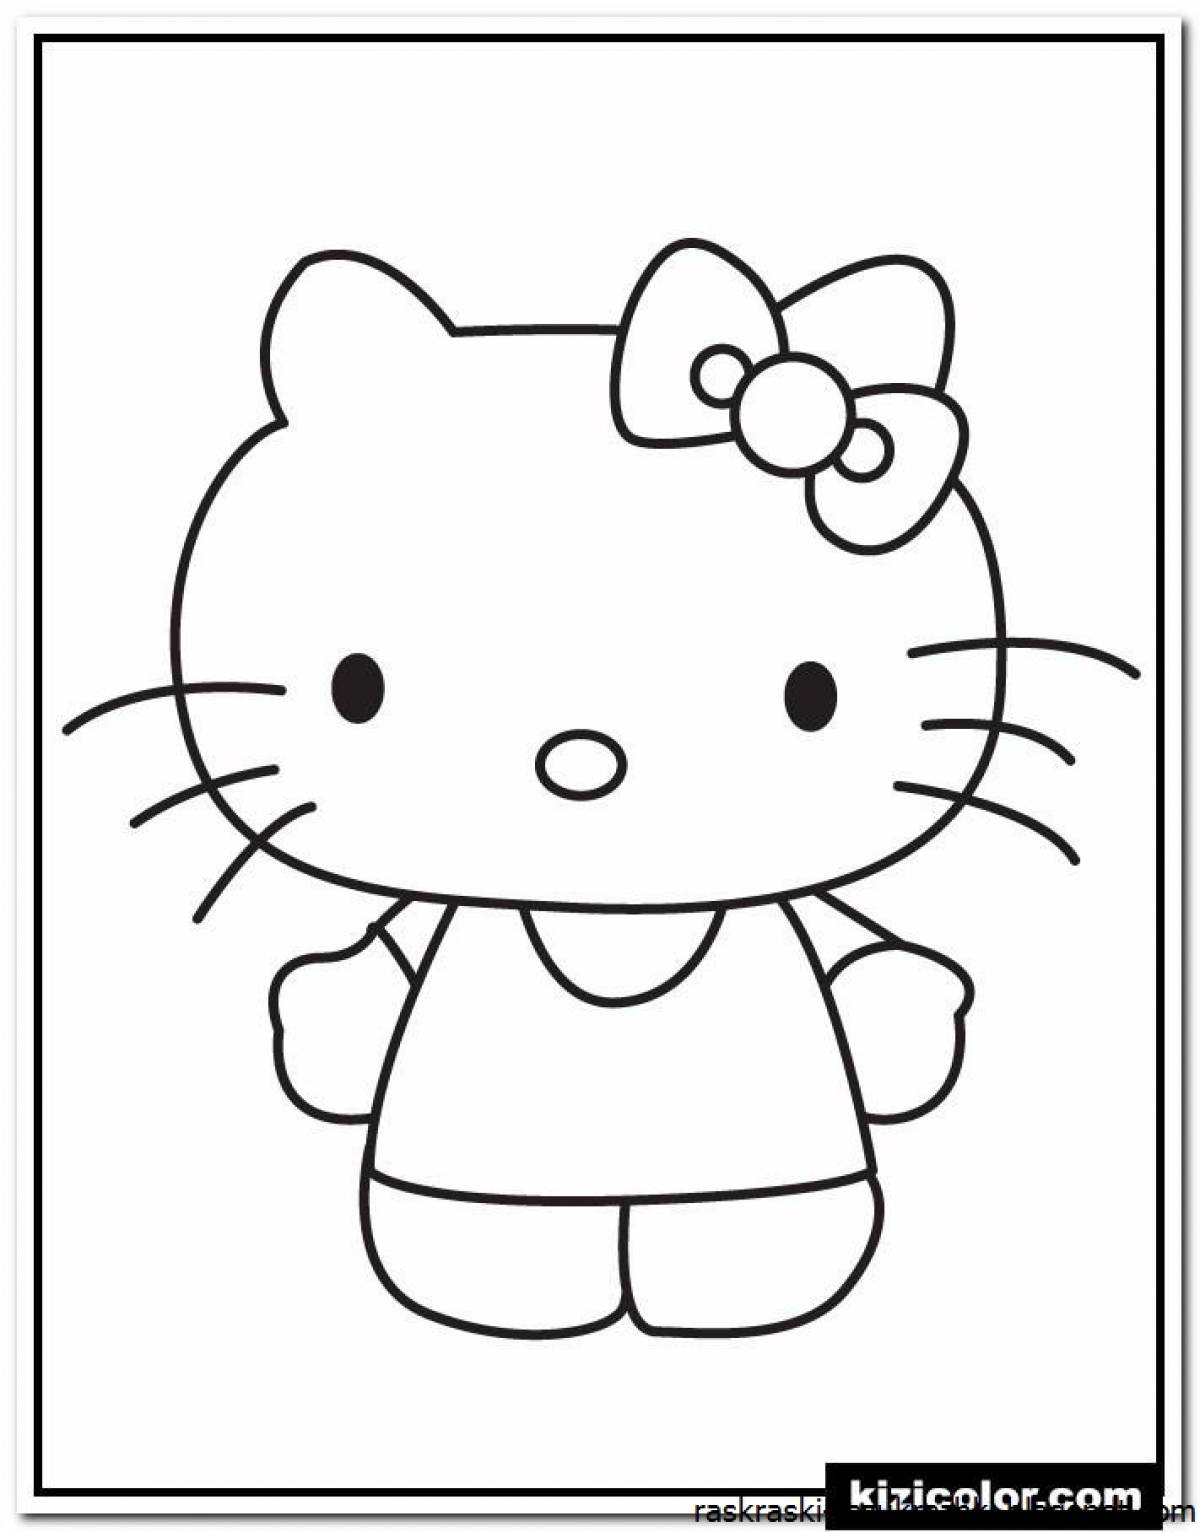 Intriguing light seal coloring page